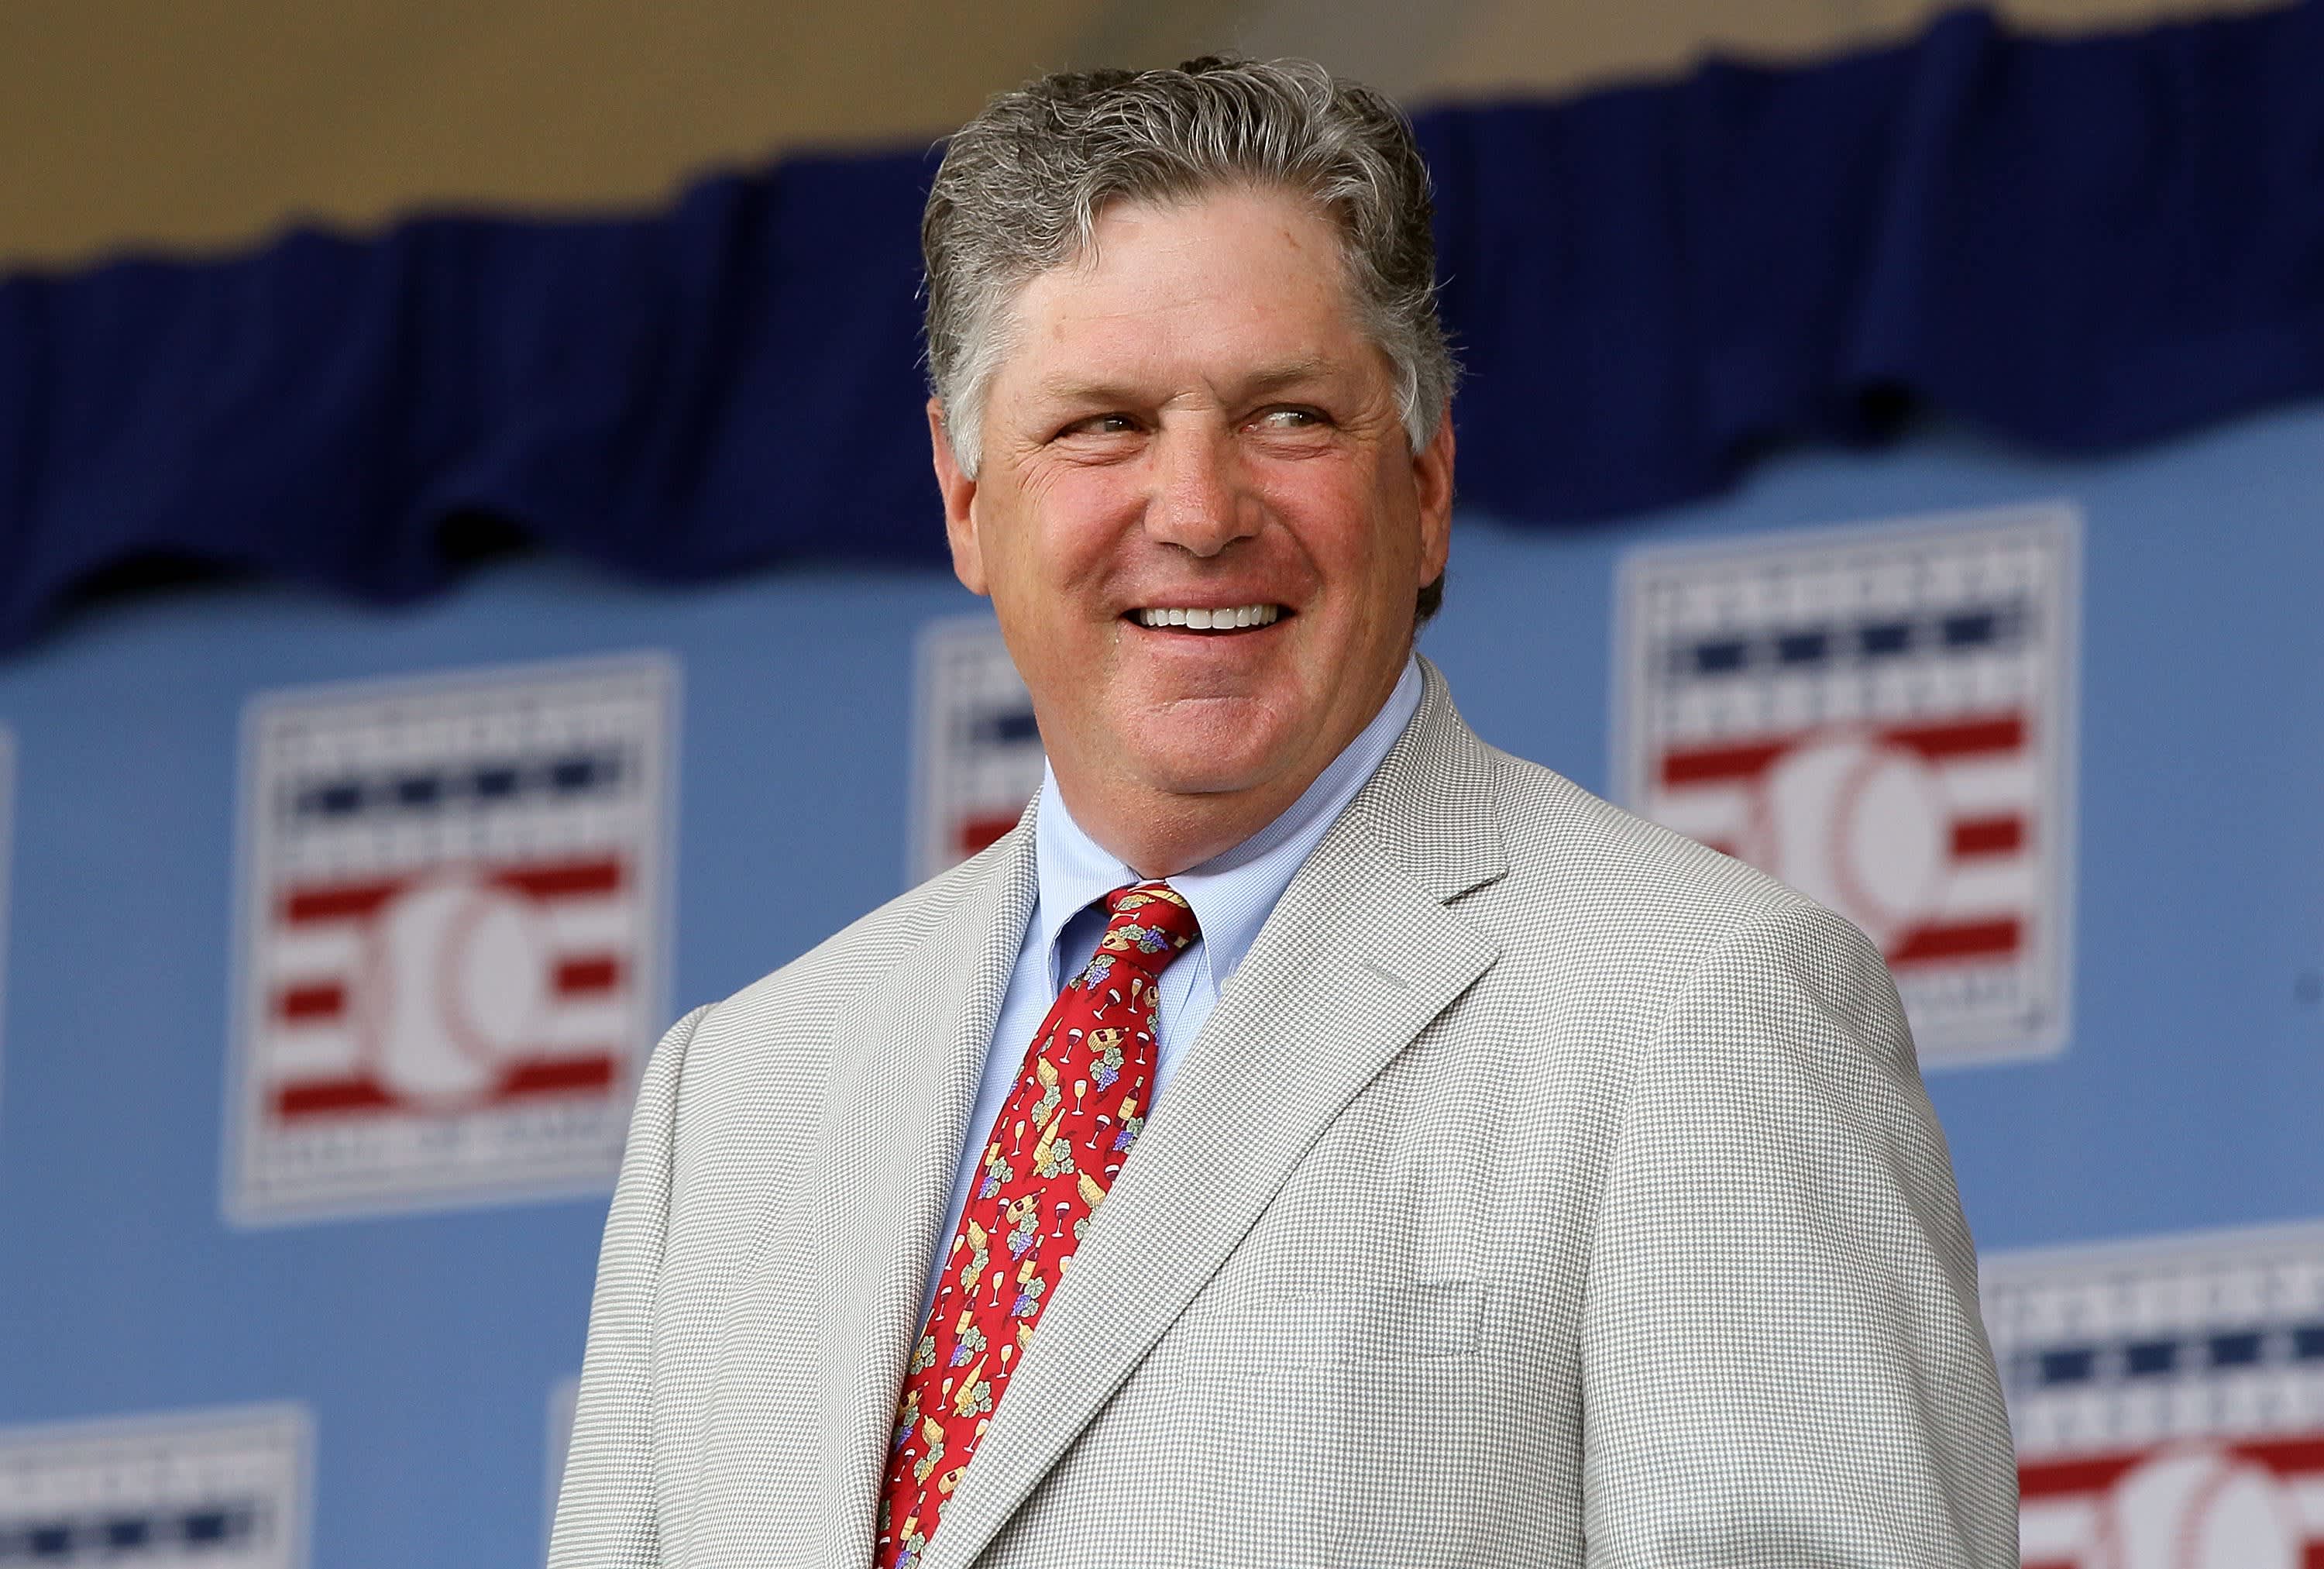 Hall of Famer Tom Seaver, the star of the Miracle Mets, dies at